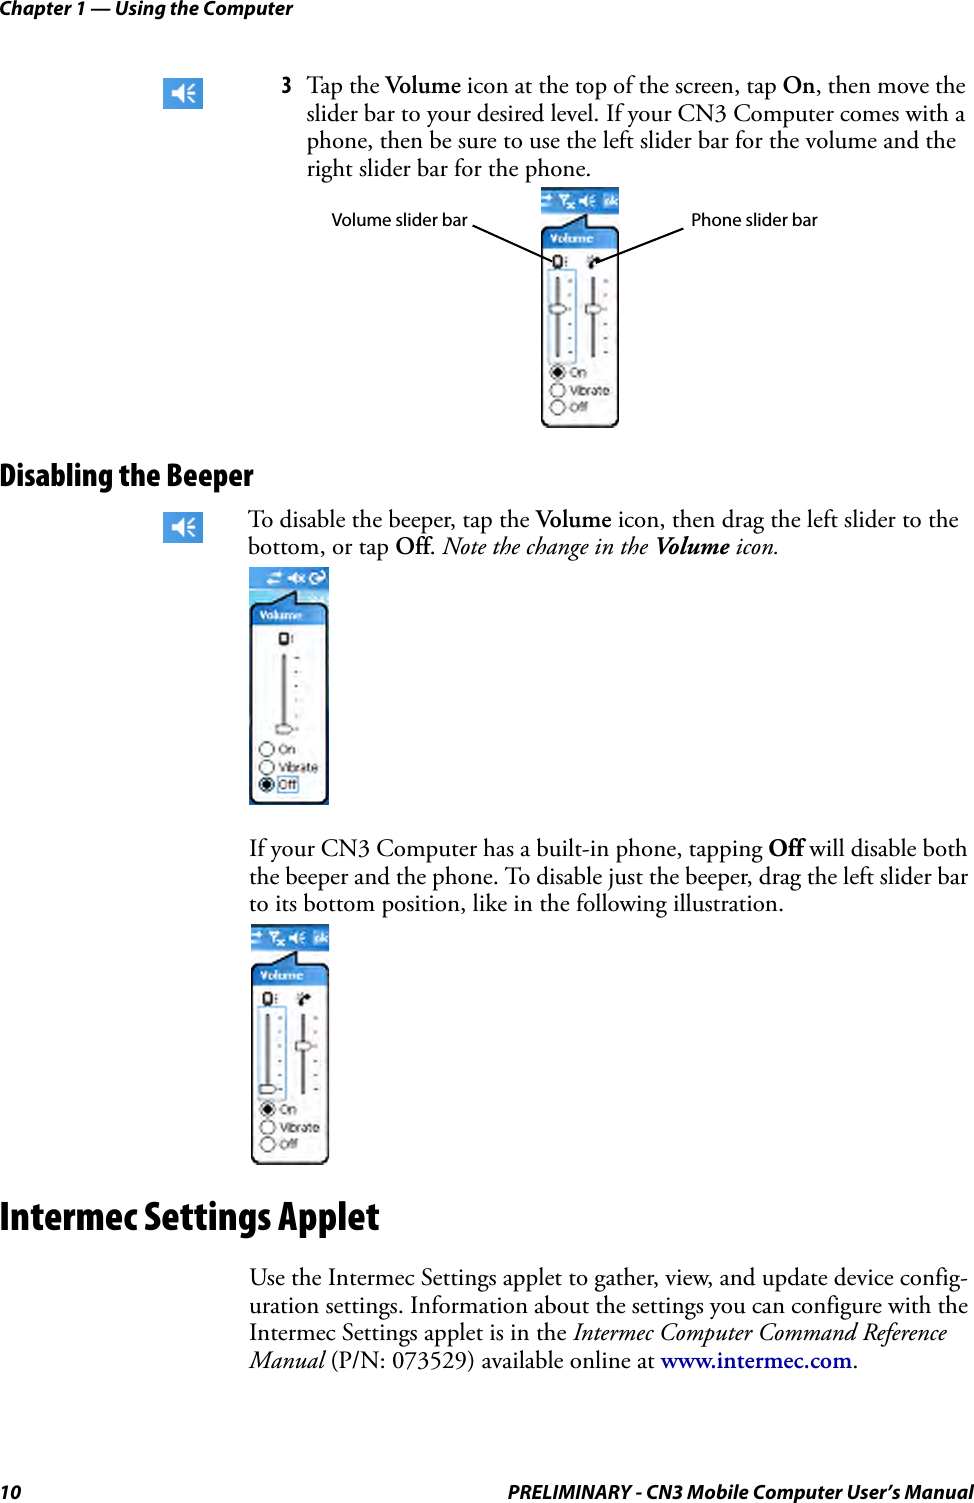 Chapter 1 — Using the Computer10 PRELIMINARY - CN3 Mobile Computer User’s ManualDisabling the BeeperIf your CN3 Computer has a built-in phone, tapping Off will disable both the beeper and the phone. To disable just the beeper, drag the left slider bar to its bottom position, like in the following illustration.Intermec Settings AppletUse the Intermec Settings applet to gather, view, and update device config-uration settings. Information about the settings you can configure with the Intermec Settings applet is in the Intermec Computer Command Reference Manual (P/N: 073529) available online at www.intermec.com.3Tap the Volume icon at the top of the screen, tap On, then move the slider bar to your desired level. If your CN3 Computer comes with a phone, then be sure to use the left slider bar for the volume and the right slider bar for the phone.To disable the beeper, tap the Volume icon, then drag the left slider to the bottom, or tap Off. Note the change in the Vo l u m e  icon.Phone slider barVolume slider bar